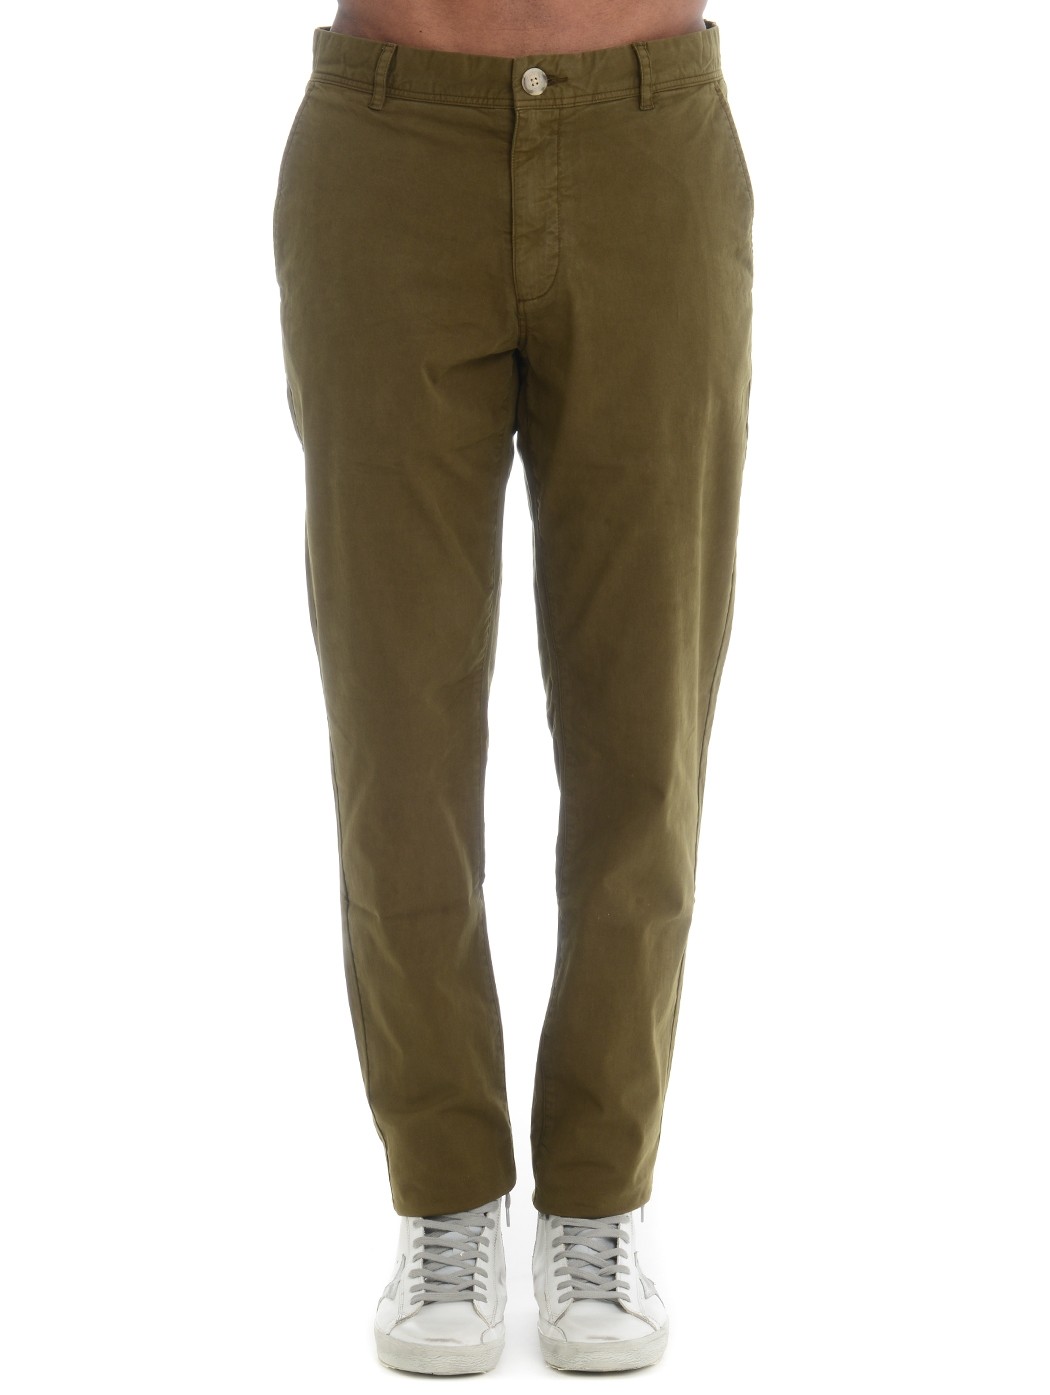  MAN TROUSERS,SPRING SUMMER TROUSERS,COTTON TROUSERS,SKIN FIT TROUSERS,INCOTEX TROUSERS,JACOB COHEN TROUSERS,NEIL BARRETT TROUSERS,MSGM TROUSERS  WOOLRICH WOTR0085MR